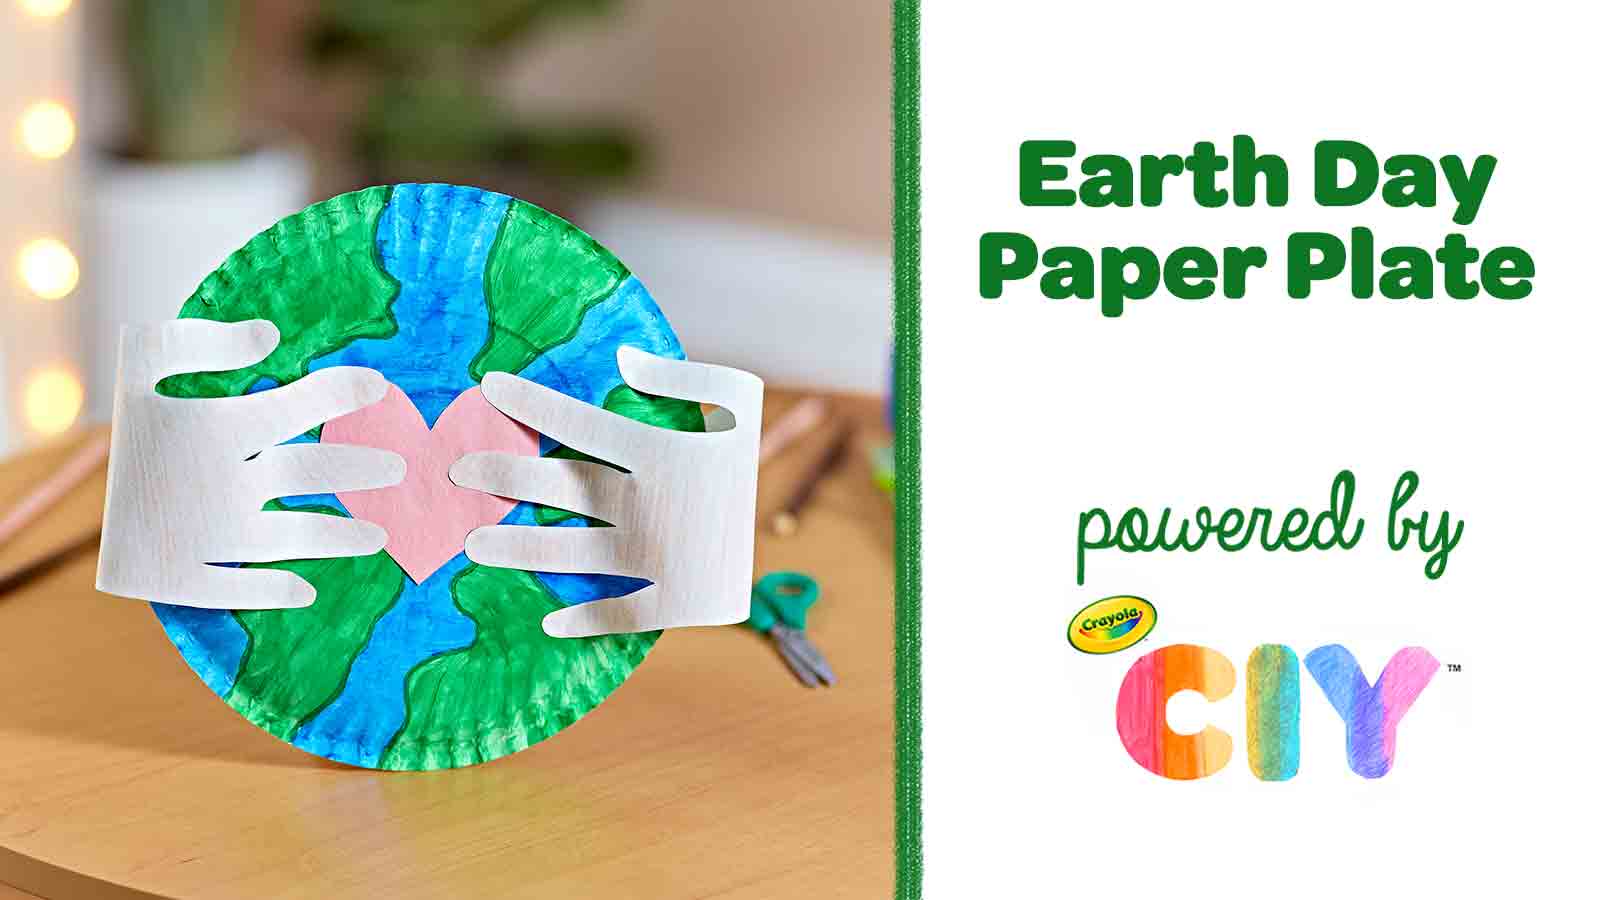 Earth Day Paper Plate Craft, Crafts, , Crayola CIY, DIY  Crafts for Kids and Adults